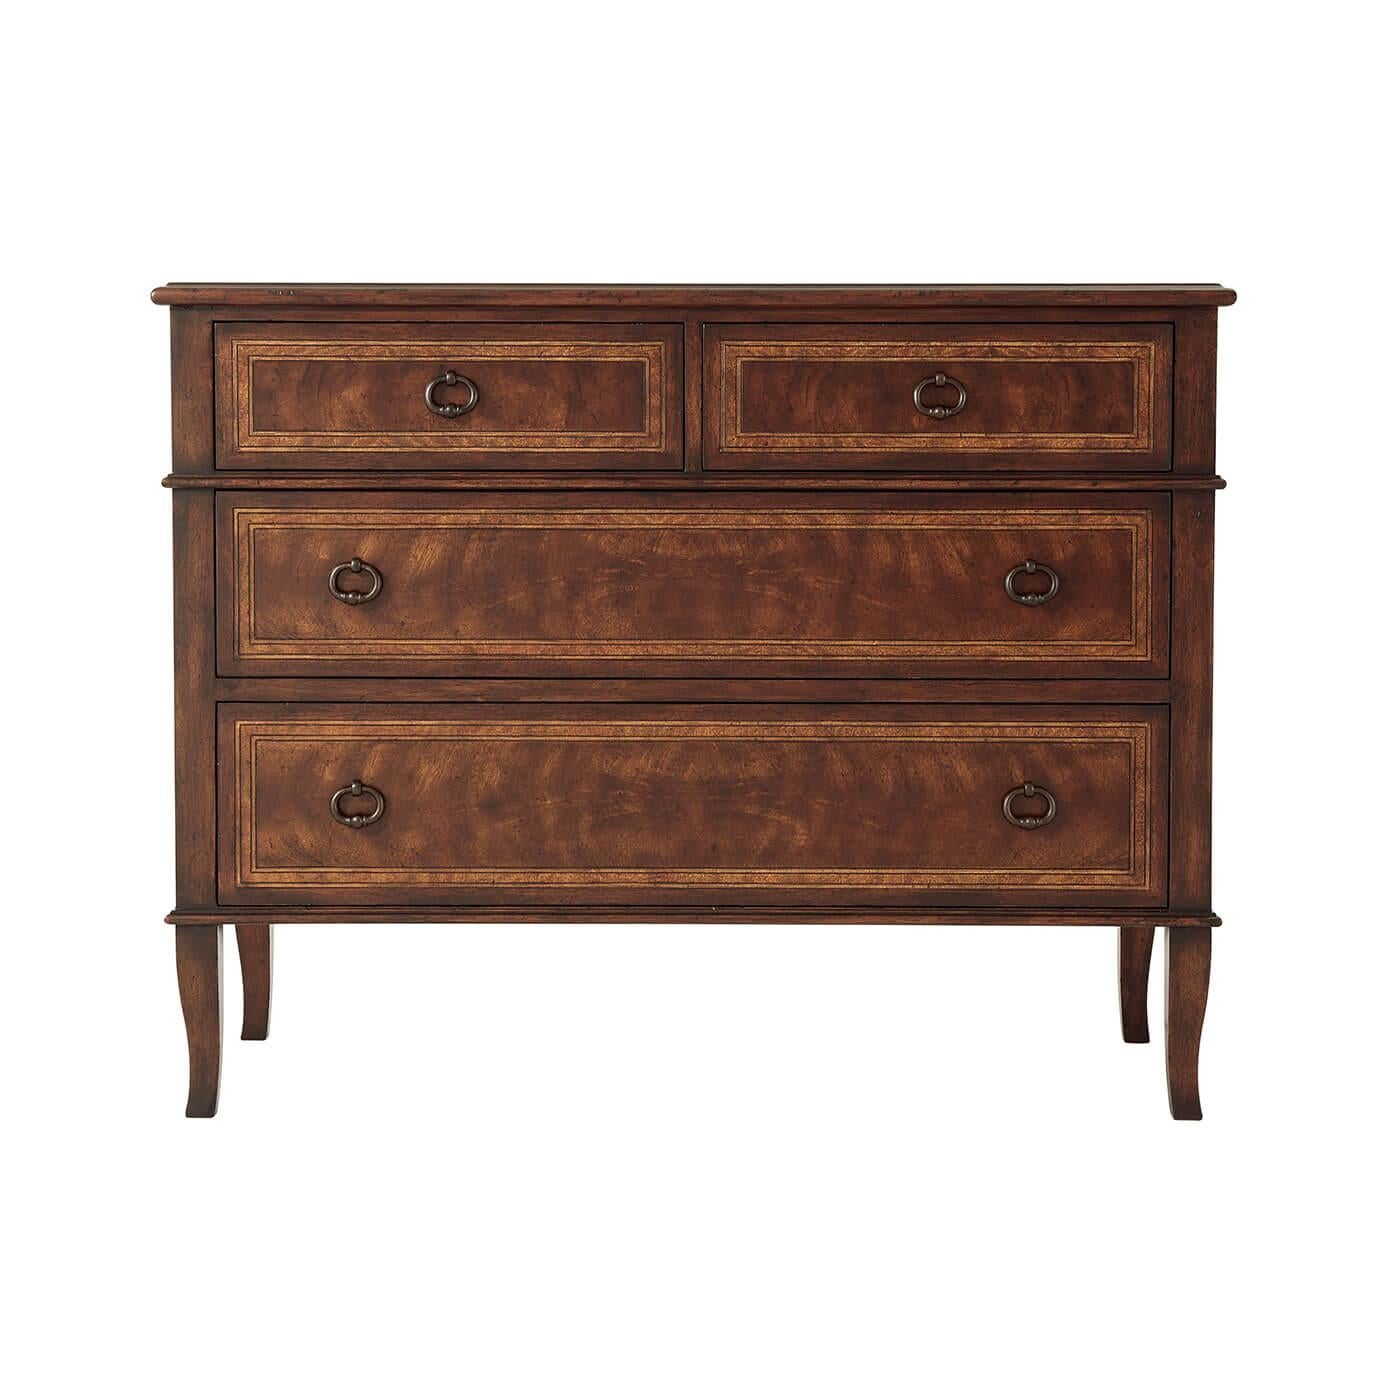 A French Neoclassic style mahogany and cerejeira veneered chest of drawers, the rectangular crossbanded top above two short frieze drawers and two further long graduated drawers, on splayed legs. 

Dimensions: 46